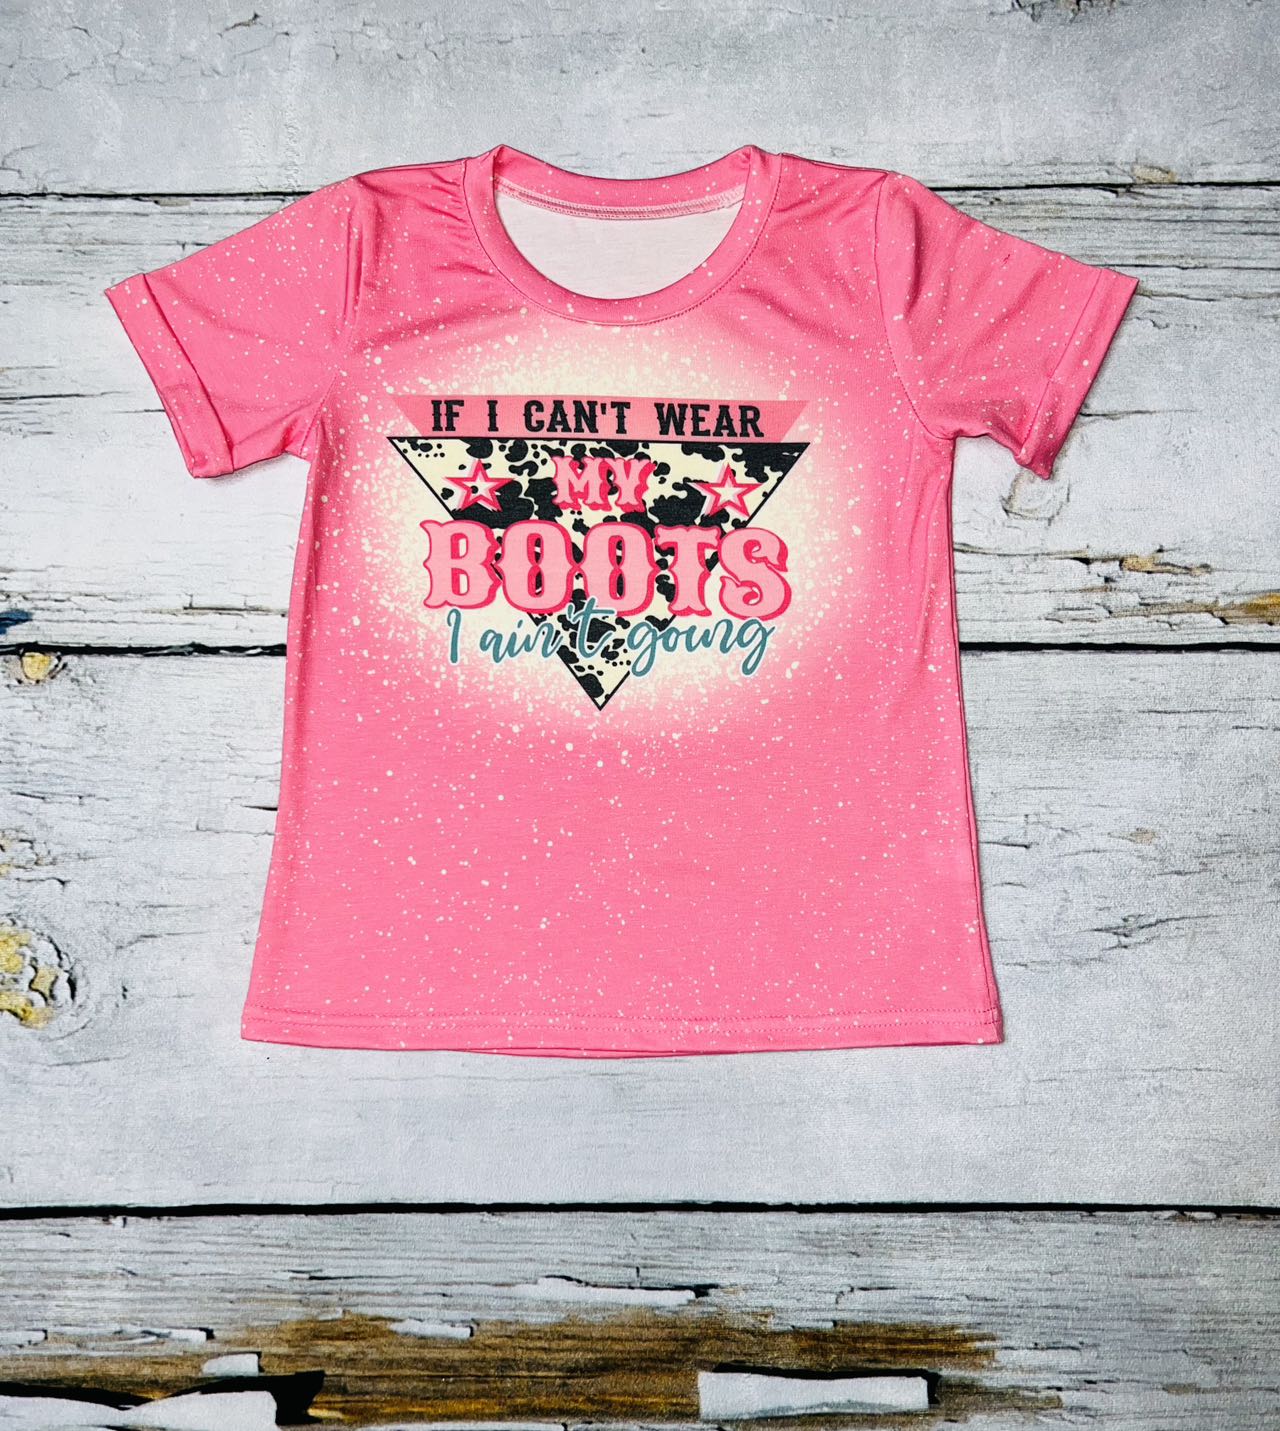 "If I Can't Wear MY Boots I Ain't Going" pink bleached short sleeve t-shirt DLH1212-19